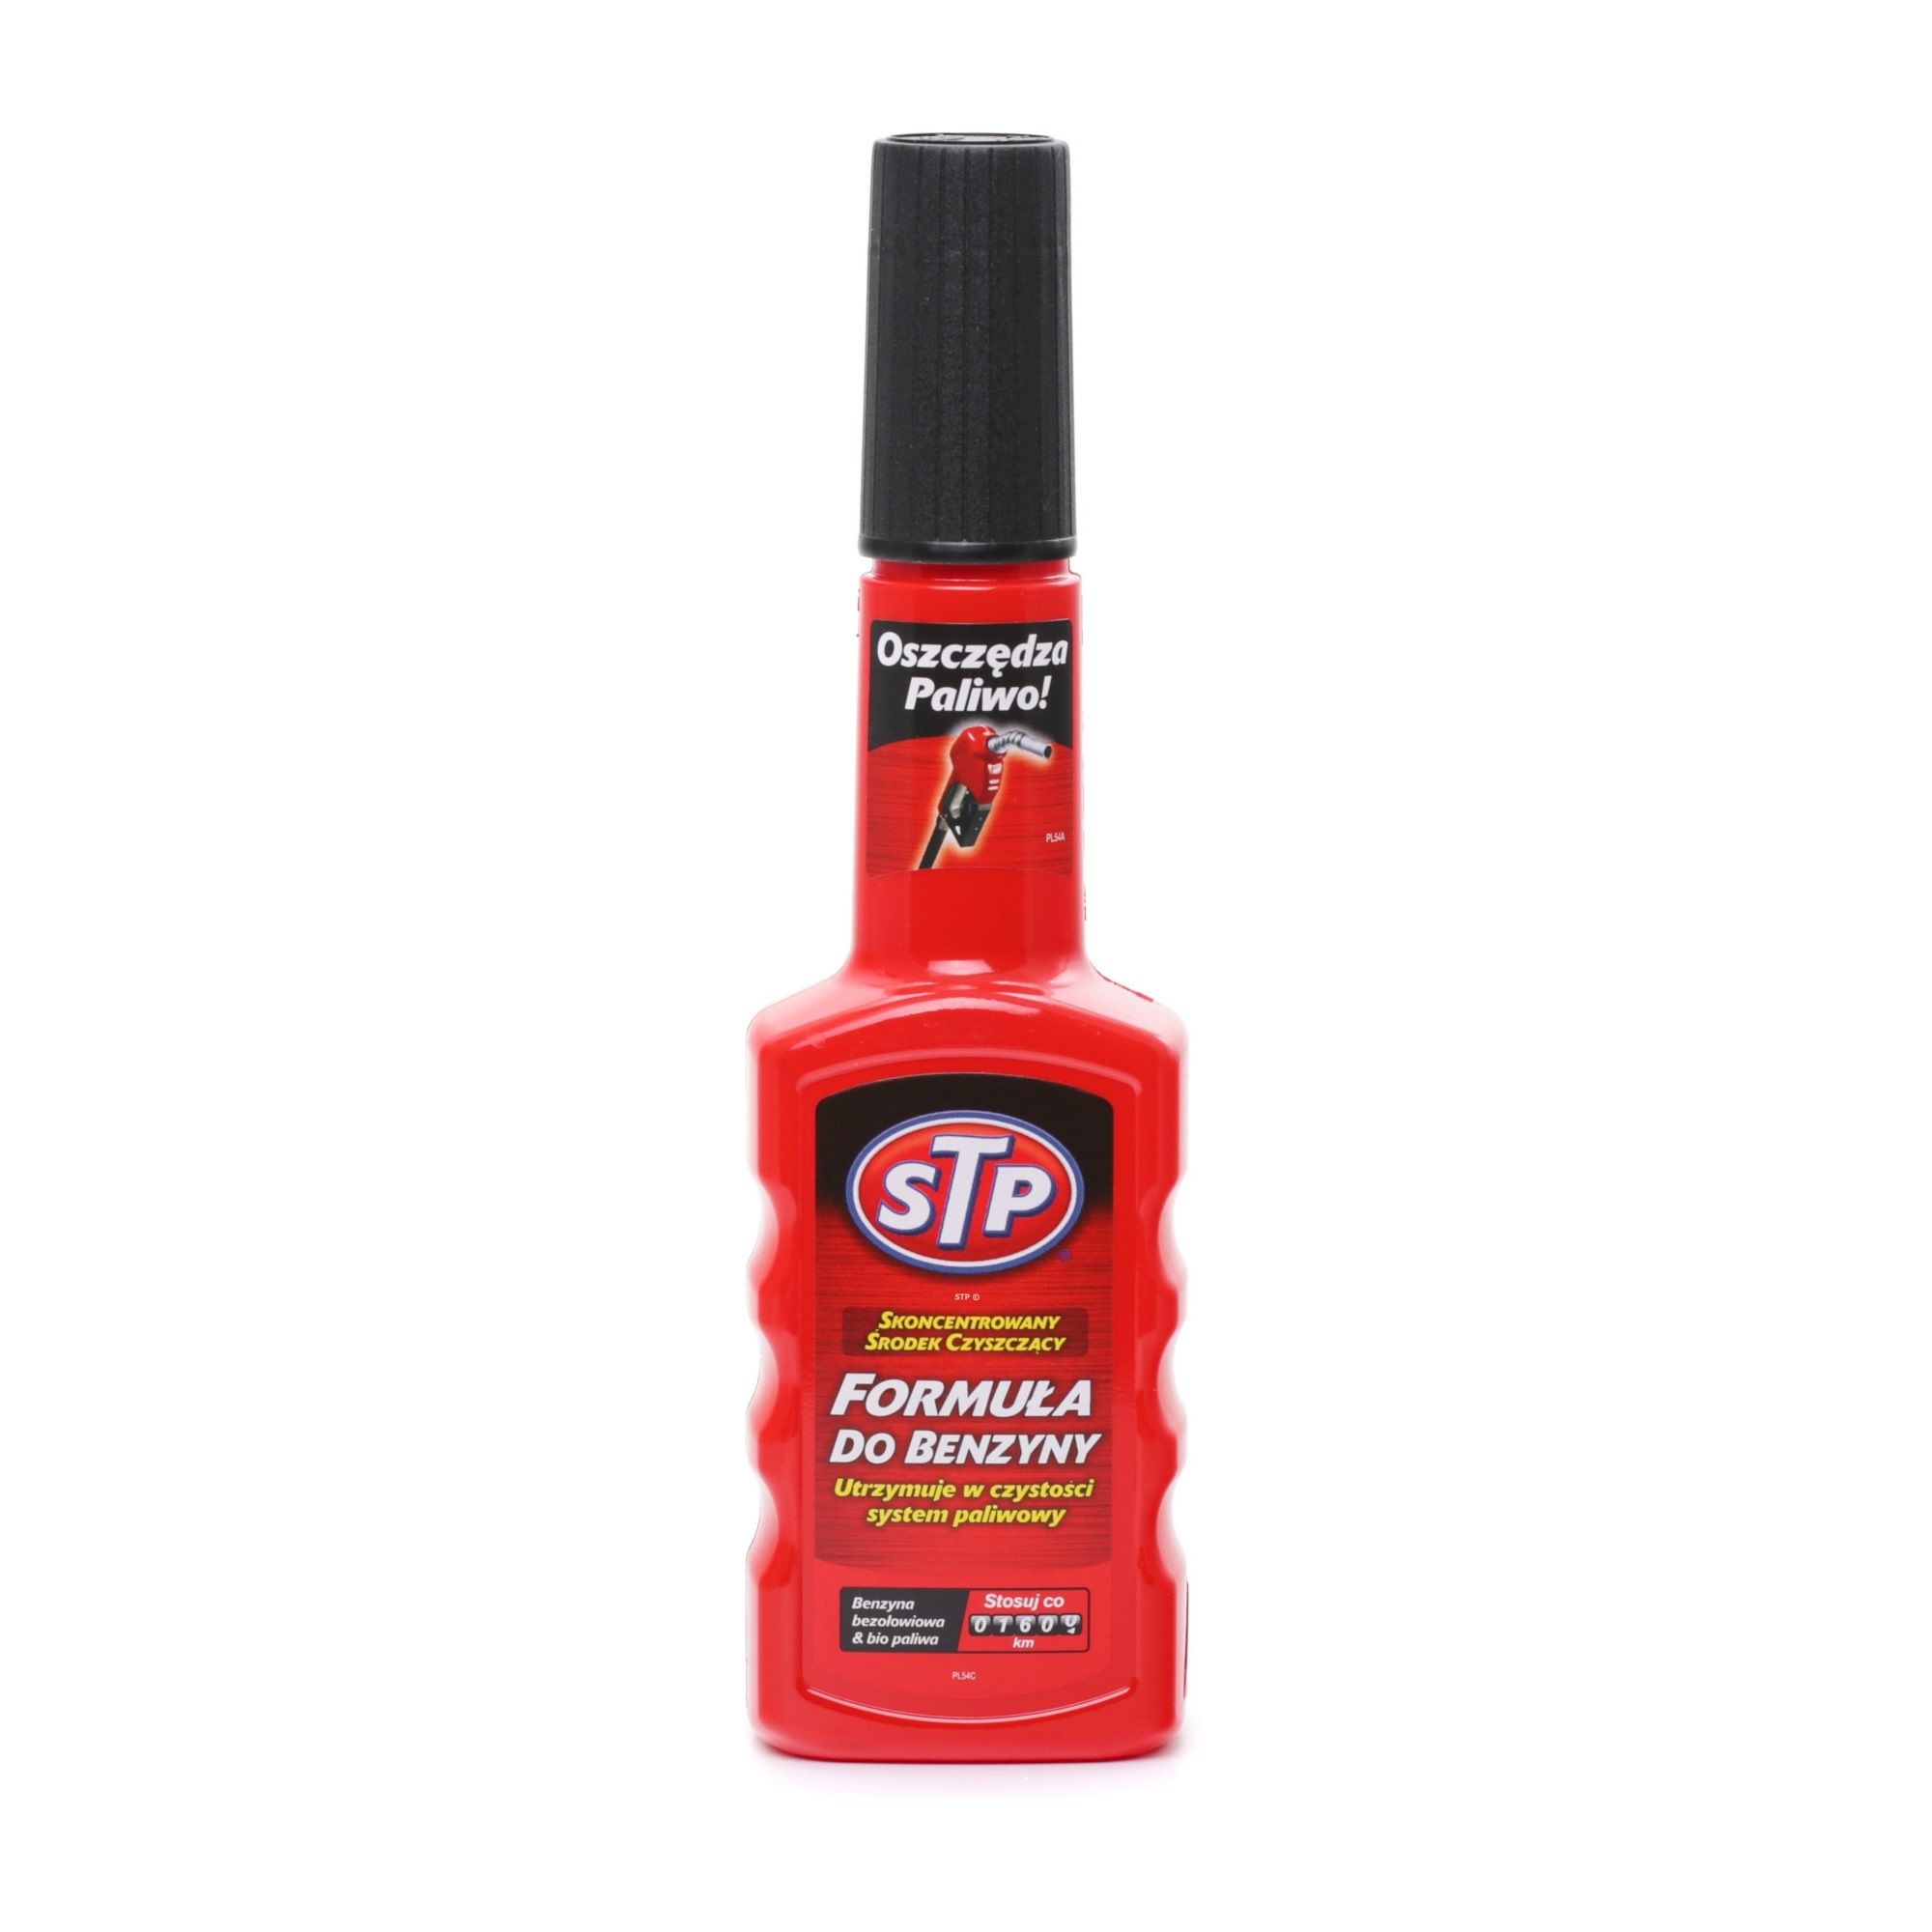 STP 30035 Fuel additives to clean engine Bottle, Capacity: 200ml, Petrol